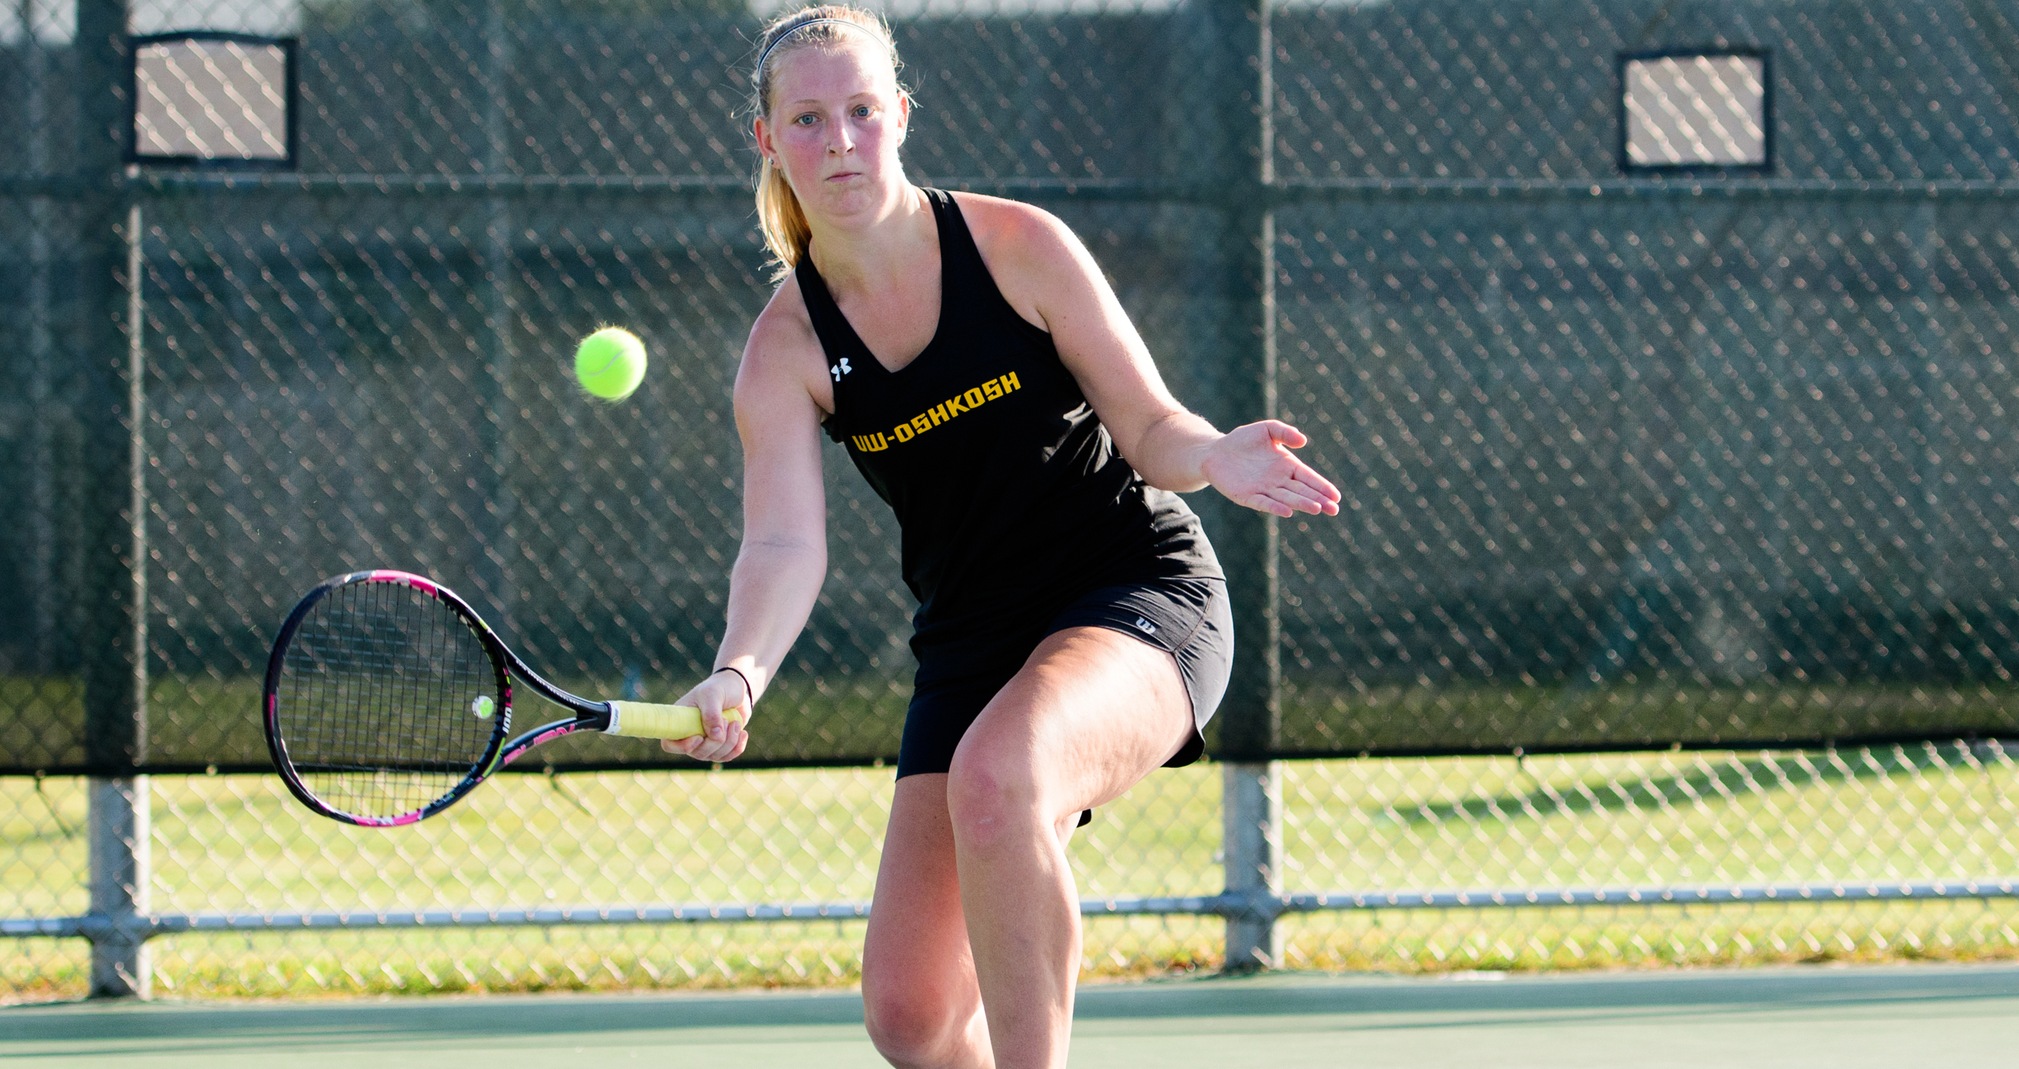 Bailey Sagen won seven of the Titans' 19 games in singles play.